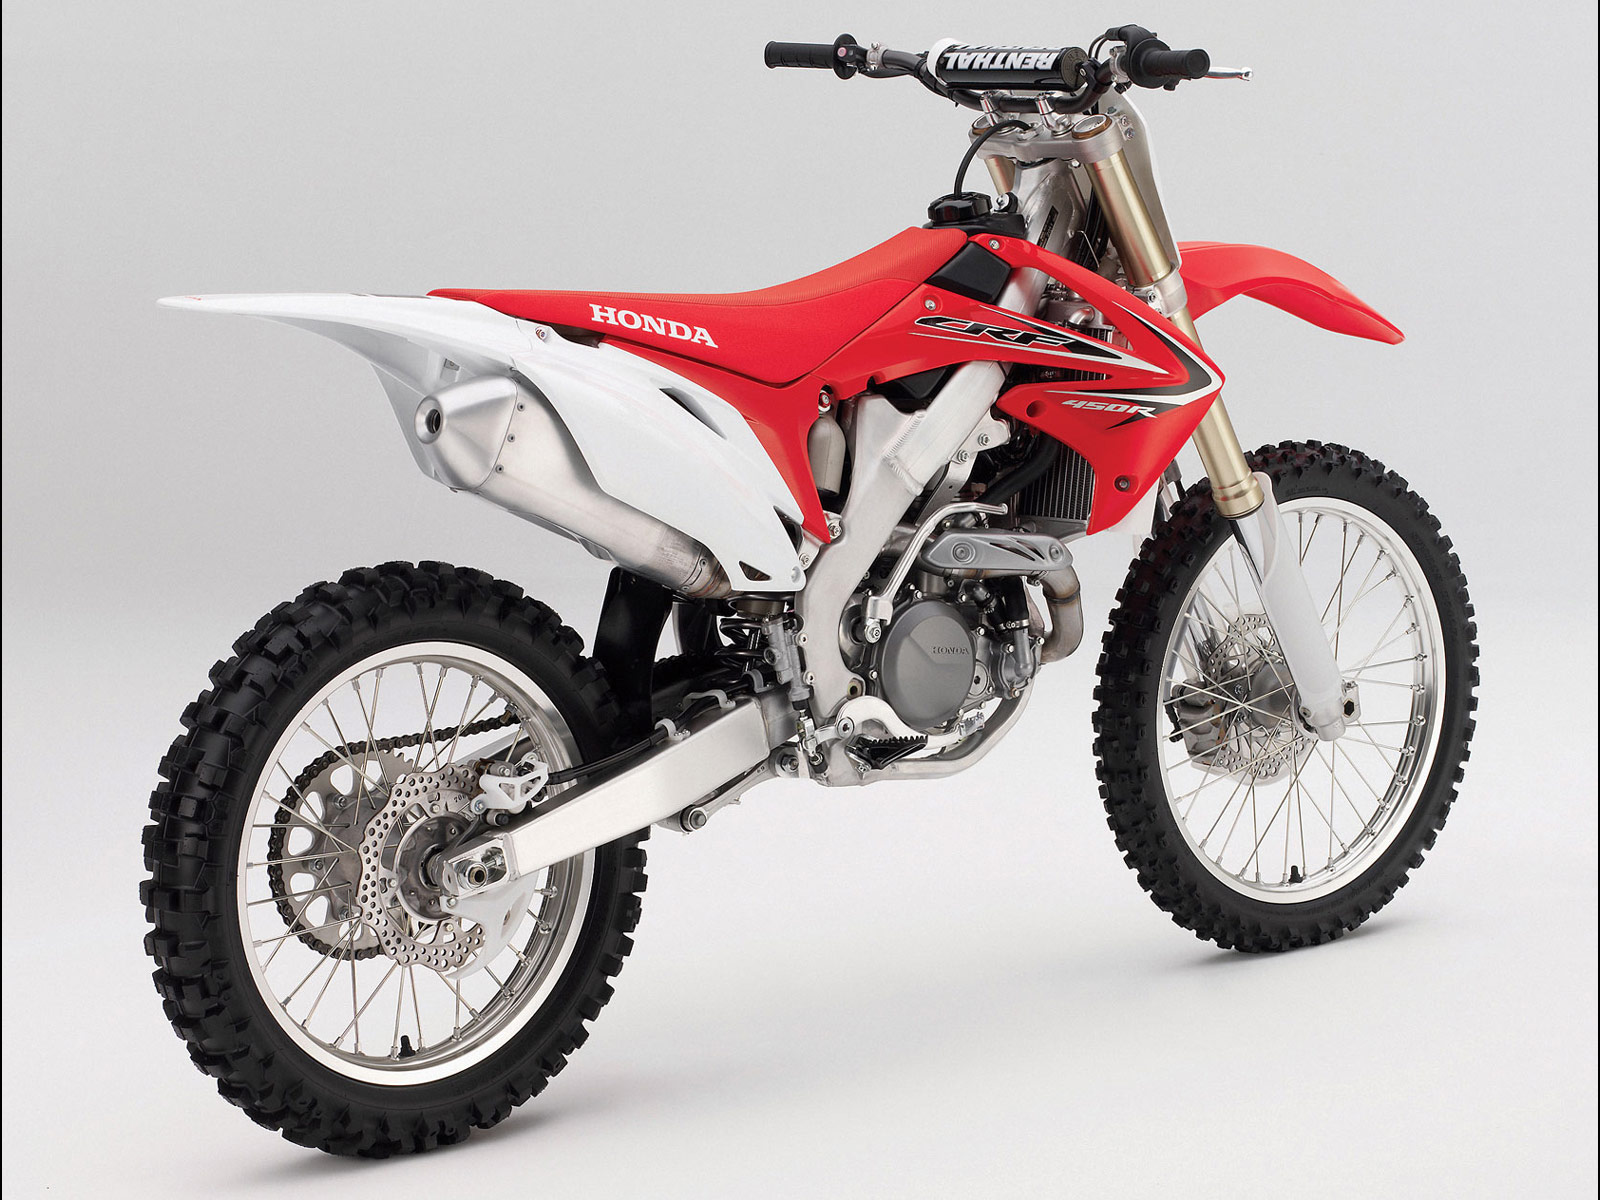 2011 HONDA CRF450R wallpapers, insuarnce, accident lawyer info